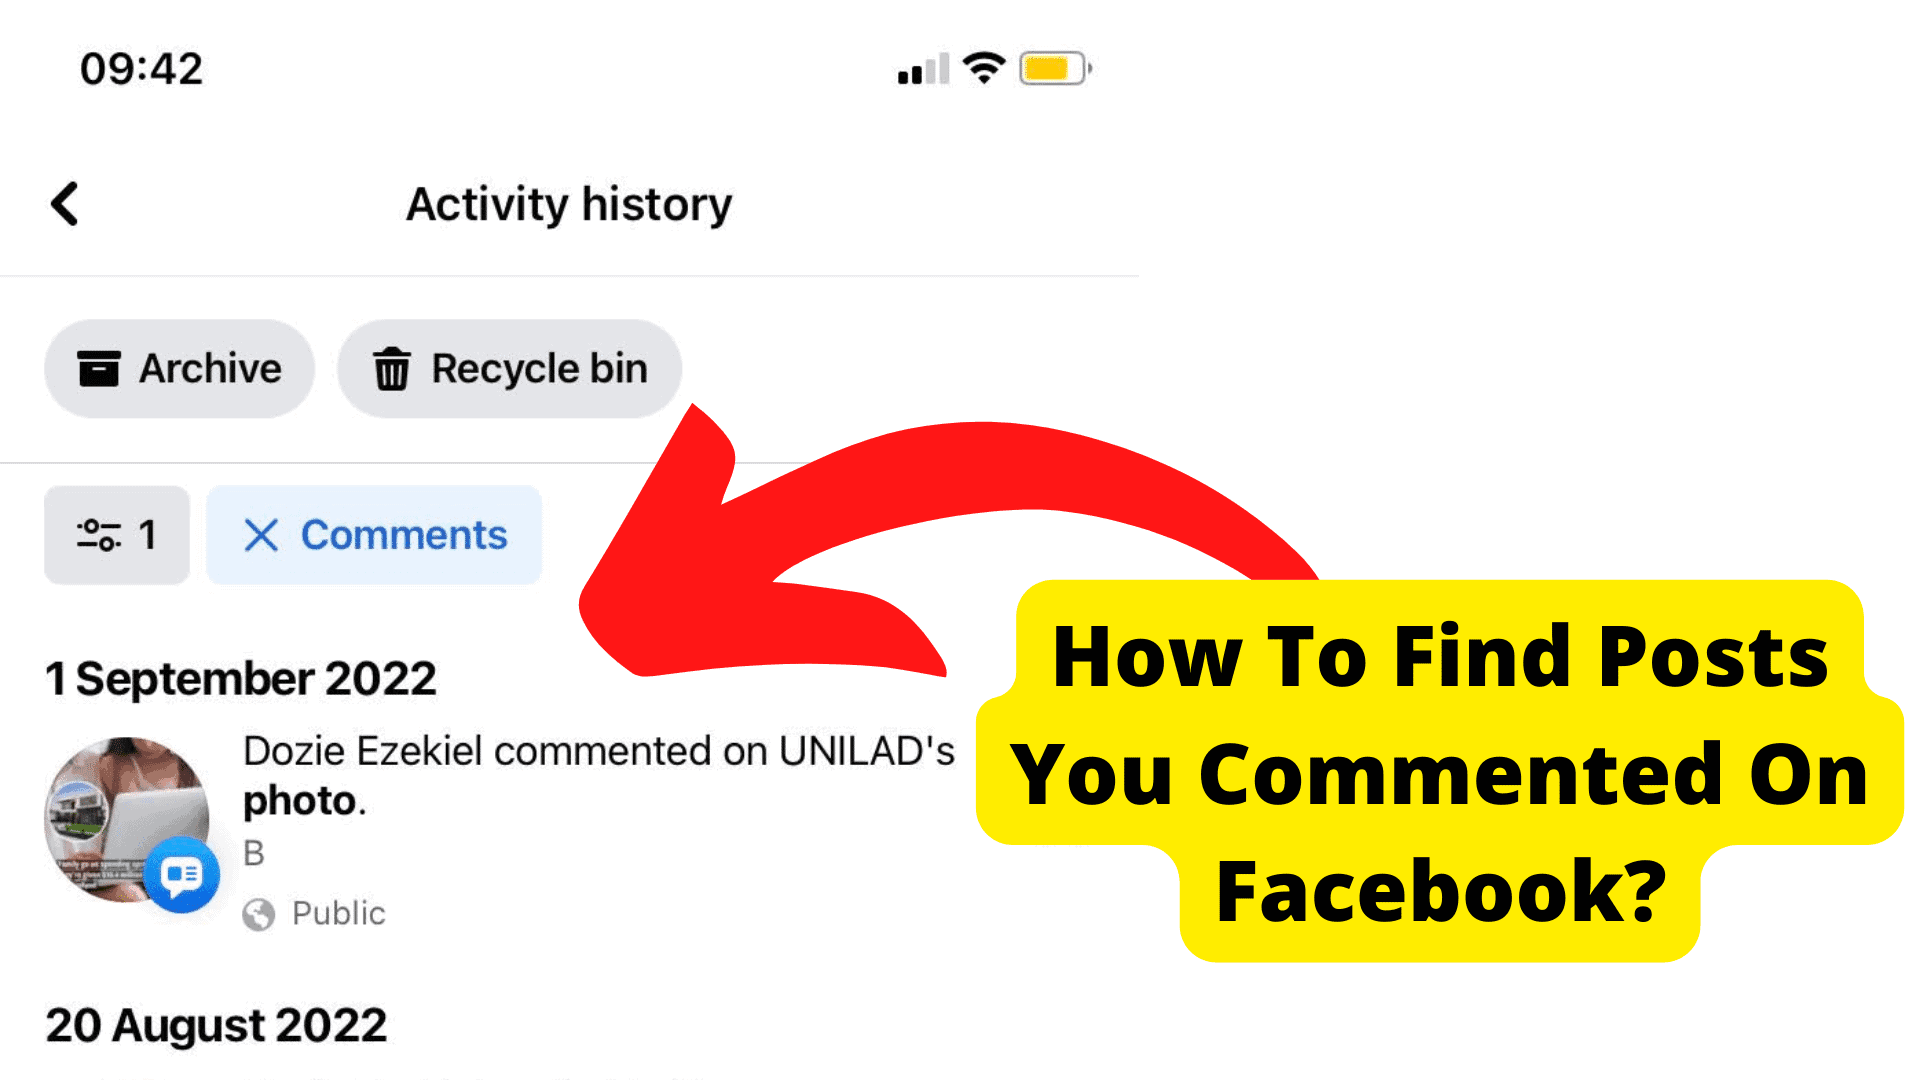 How To Find Posts You Commented On Facebook